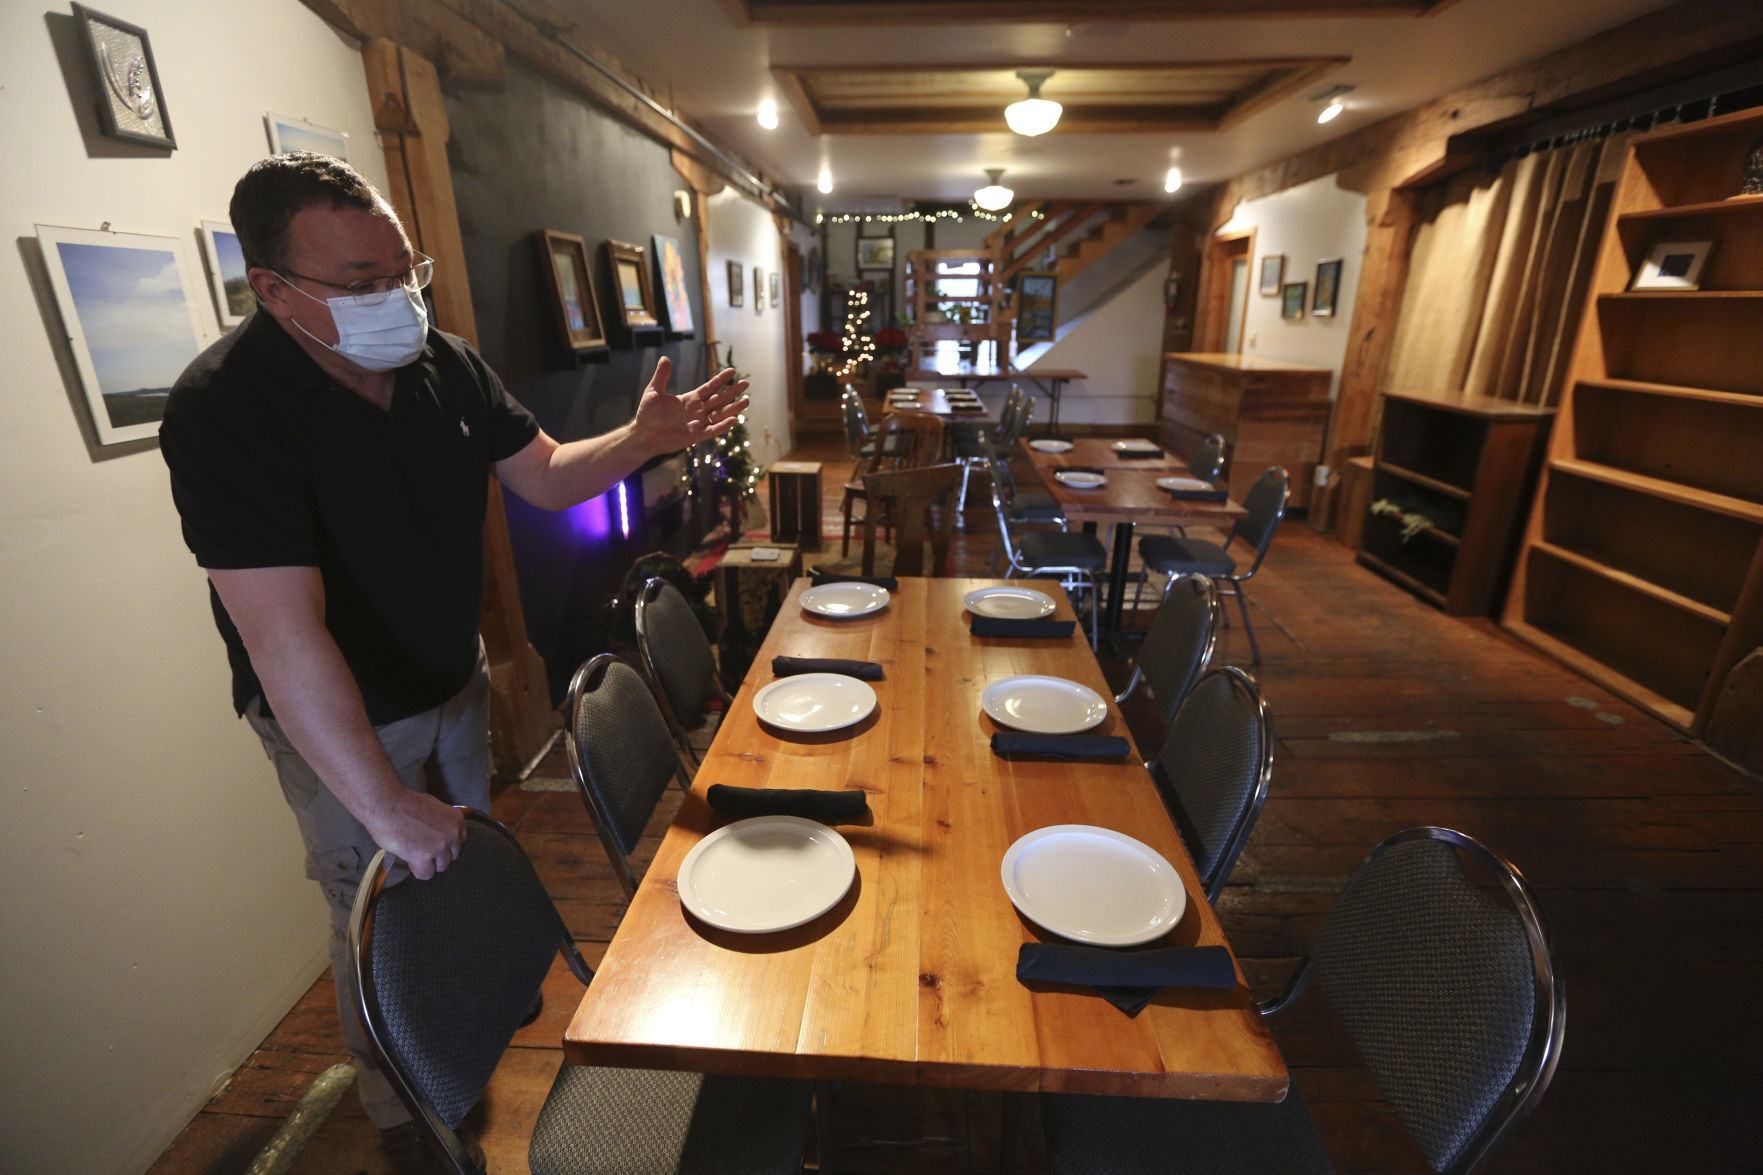 Mark Herman, owner and manager of Flatted Fifth Blues & BBQ in Bellevue, Iowa, has created a private dining space on the third floor in response to safety concerns of customers during the COVID-19 pandemic. PHOTO CREDIT: Dave Kettering